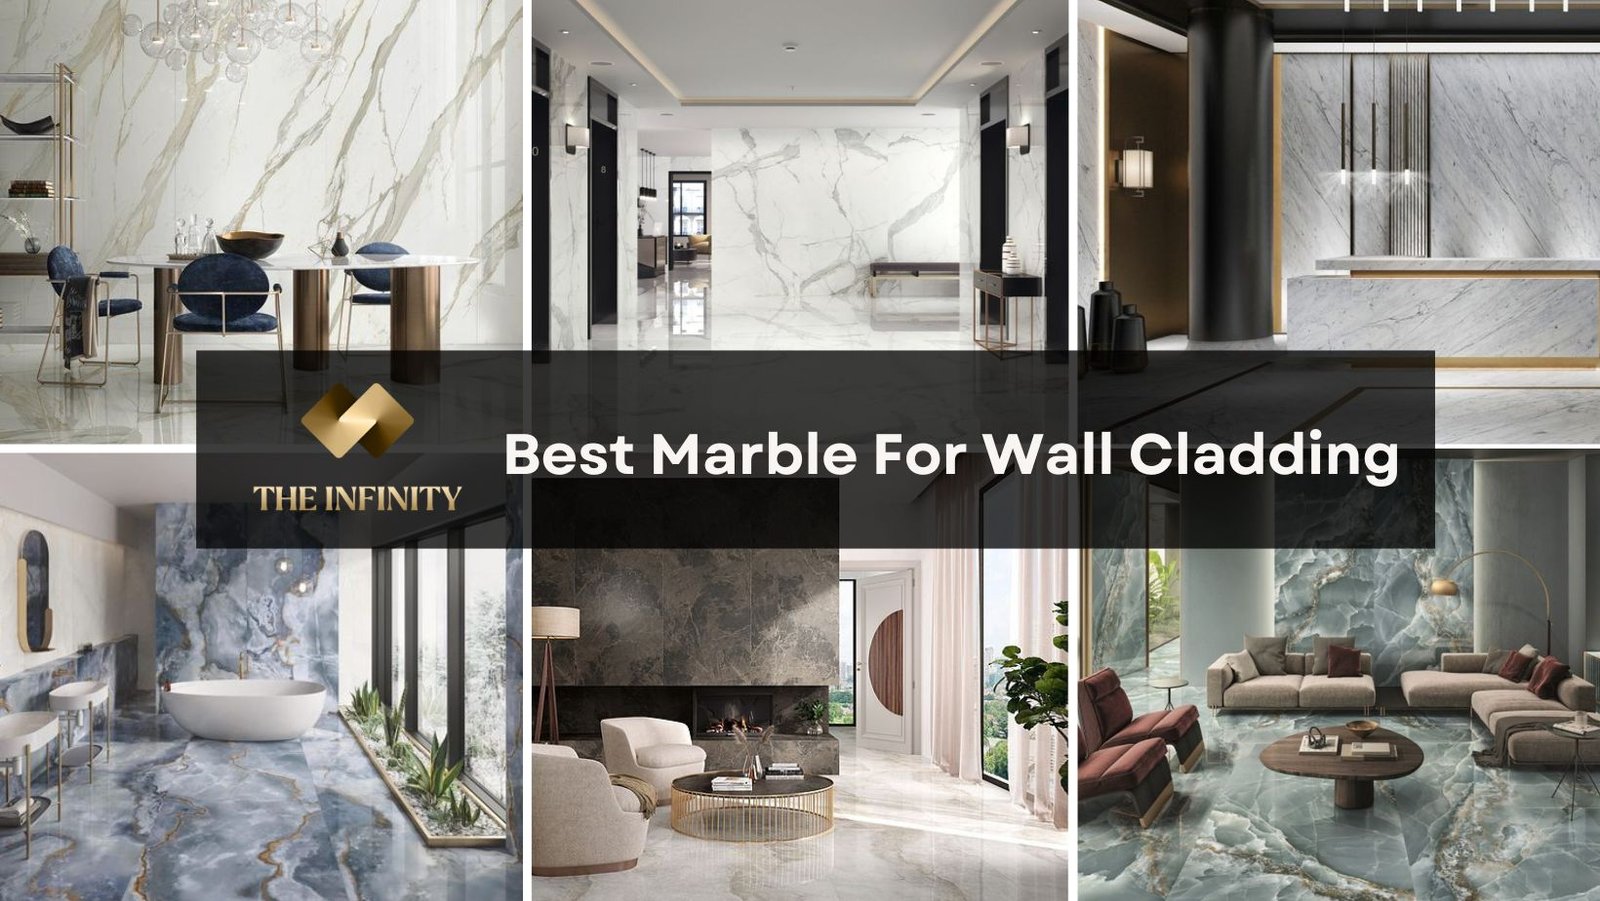 Best Marble For Wall Cladding